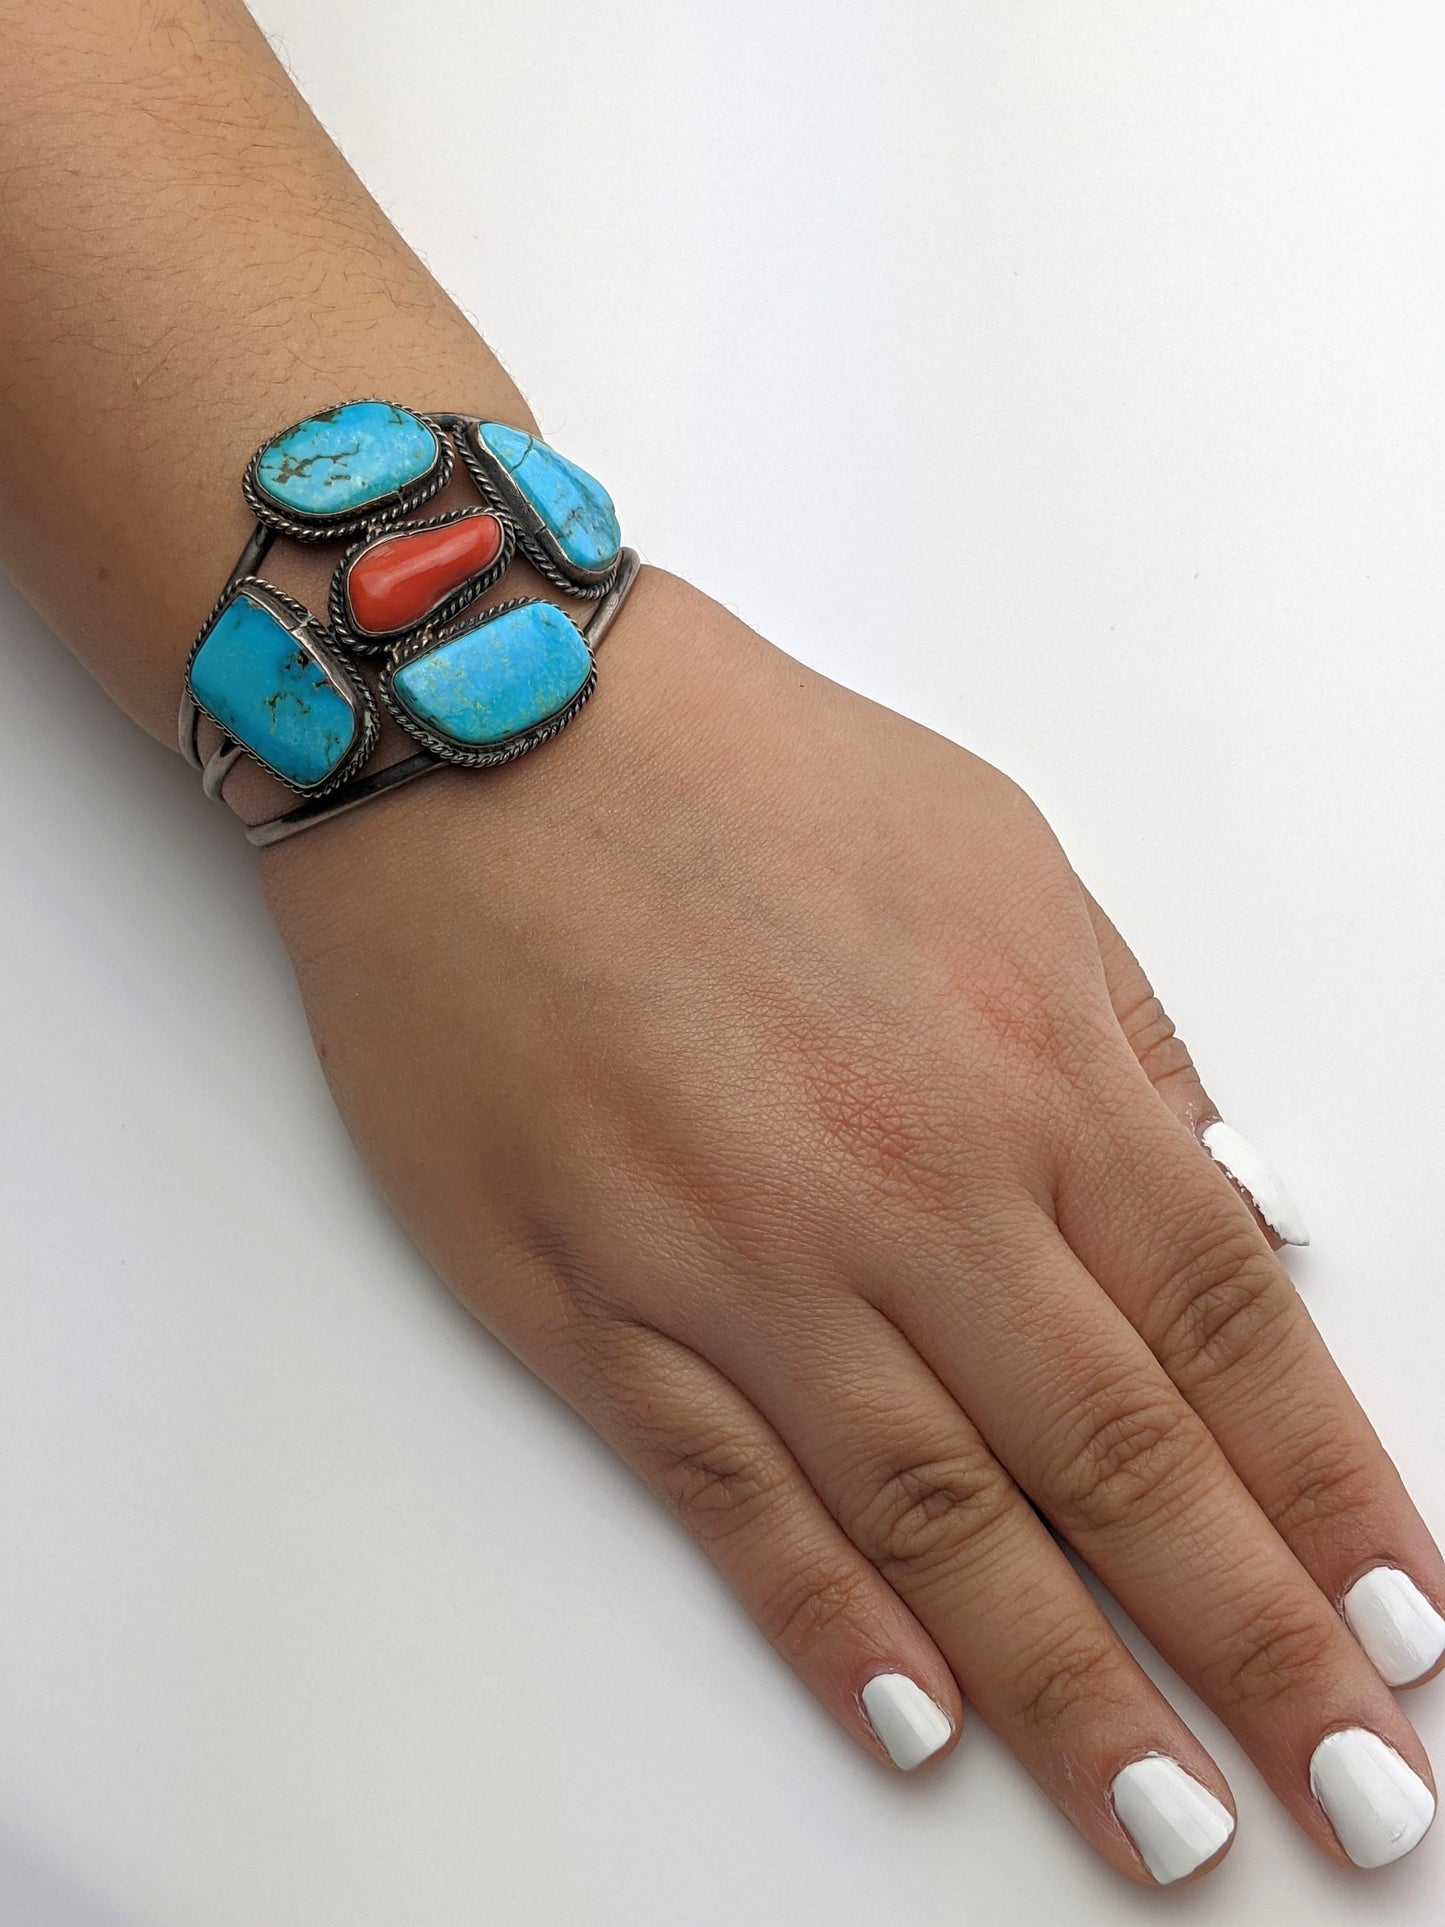 Native American Sterling Silver Cuff Bracelet Blue, Orange Turquoise, Coral